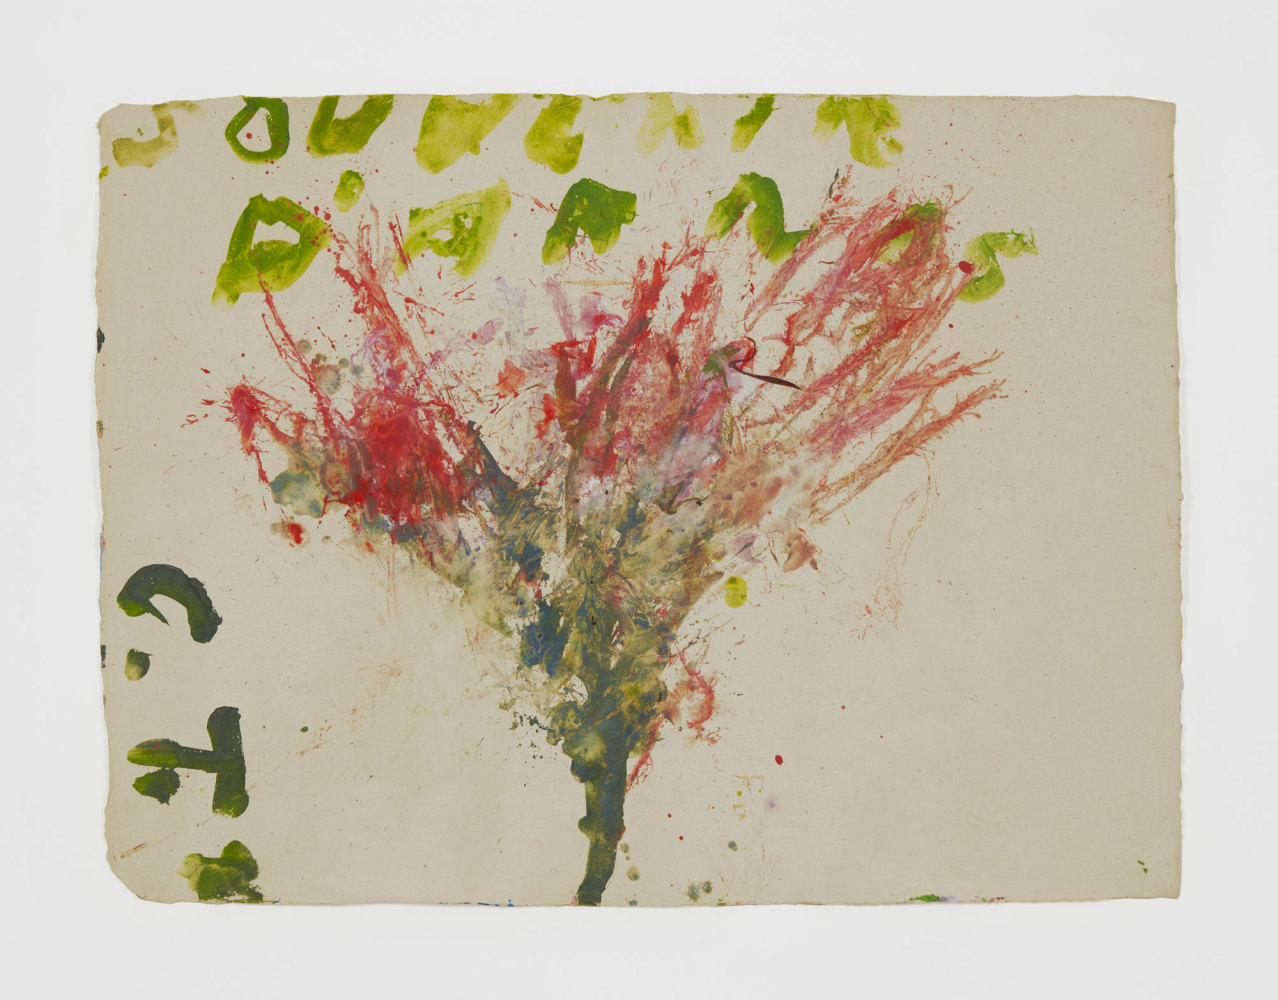 Cy Twombly

Untitled (Souvenir d&amp;#39;&amp;Aacute;rros) Seychelles

1990

acrylic on handmade paper

21 7/8 x 29 5/8 inches (55.6 x 75.2 cm)